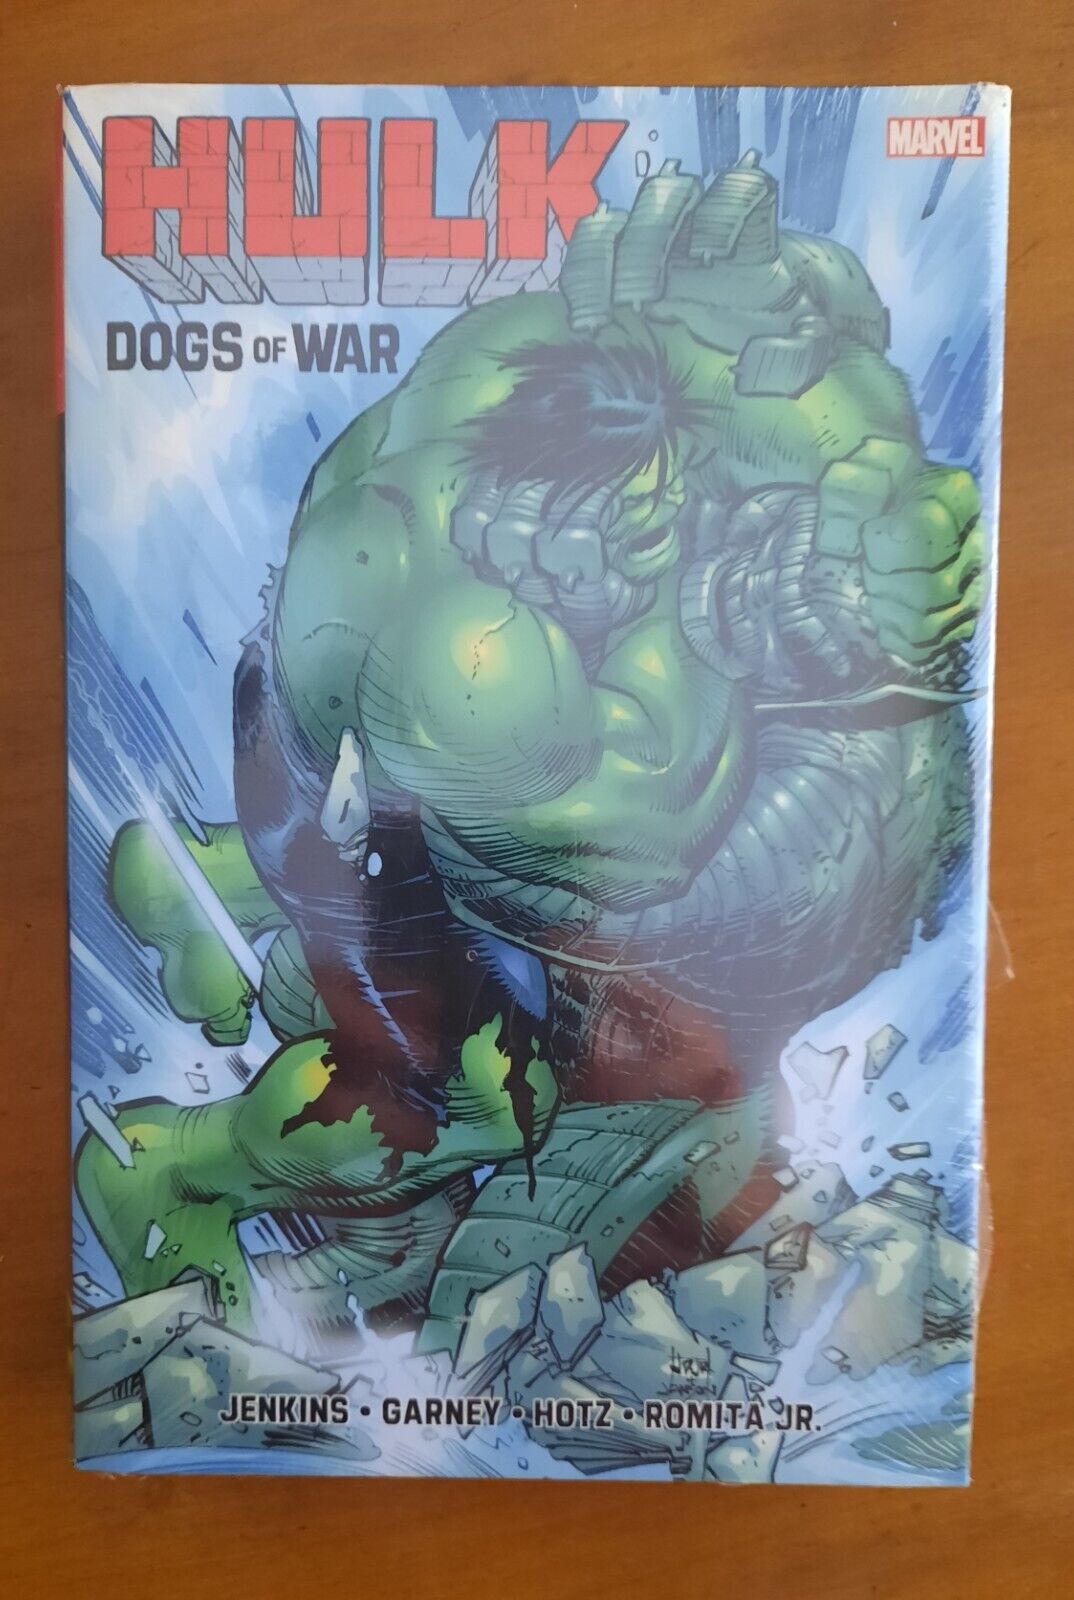 Hulk: Dogs of War (Massive) OMNIBUS (832 pages)(2019) Collects 32 Comics